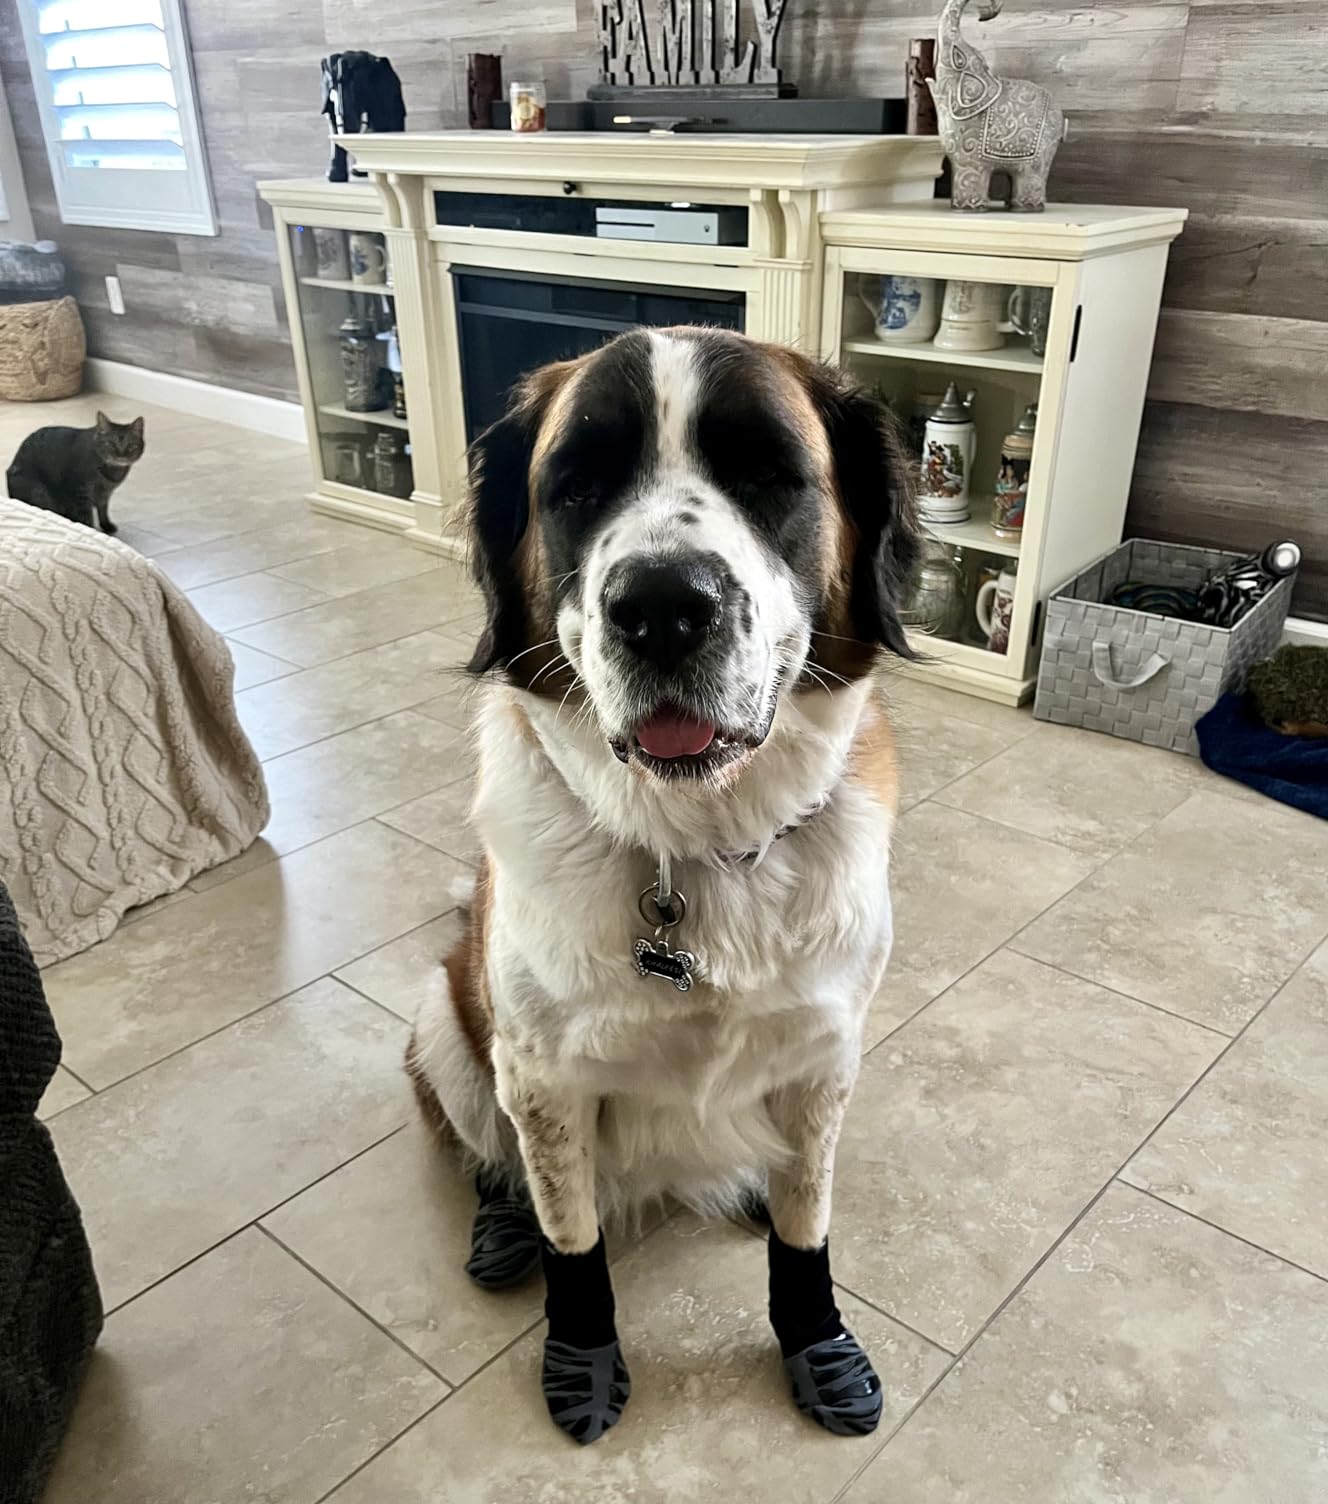 St. Bernard that has gotten their mobility back on the tile floors while wearing TigerToes dog socks